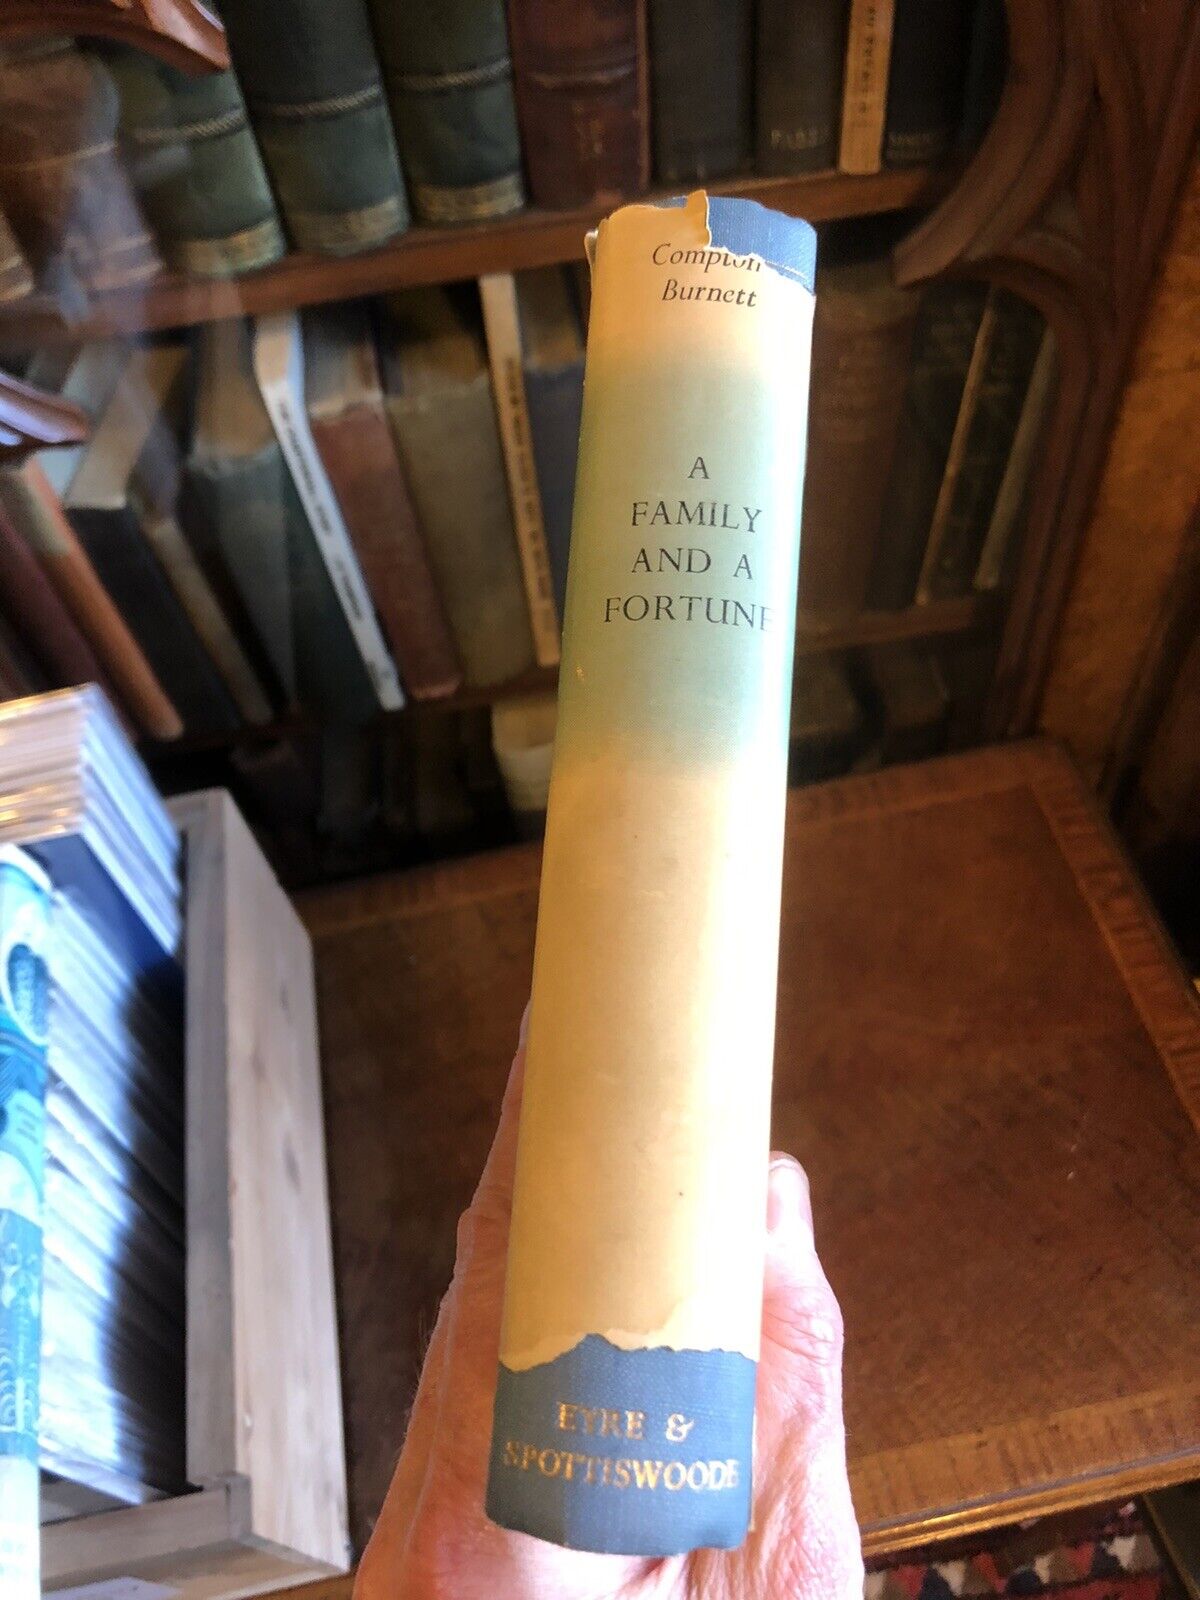 Ivy Compton-Burnett :  A Family and a Fortune : HB in Dust Wrapper 1940s